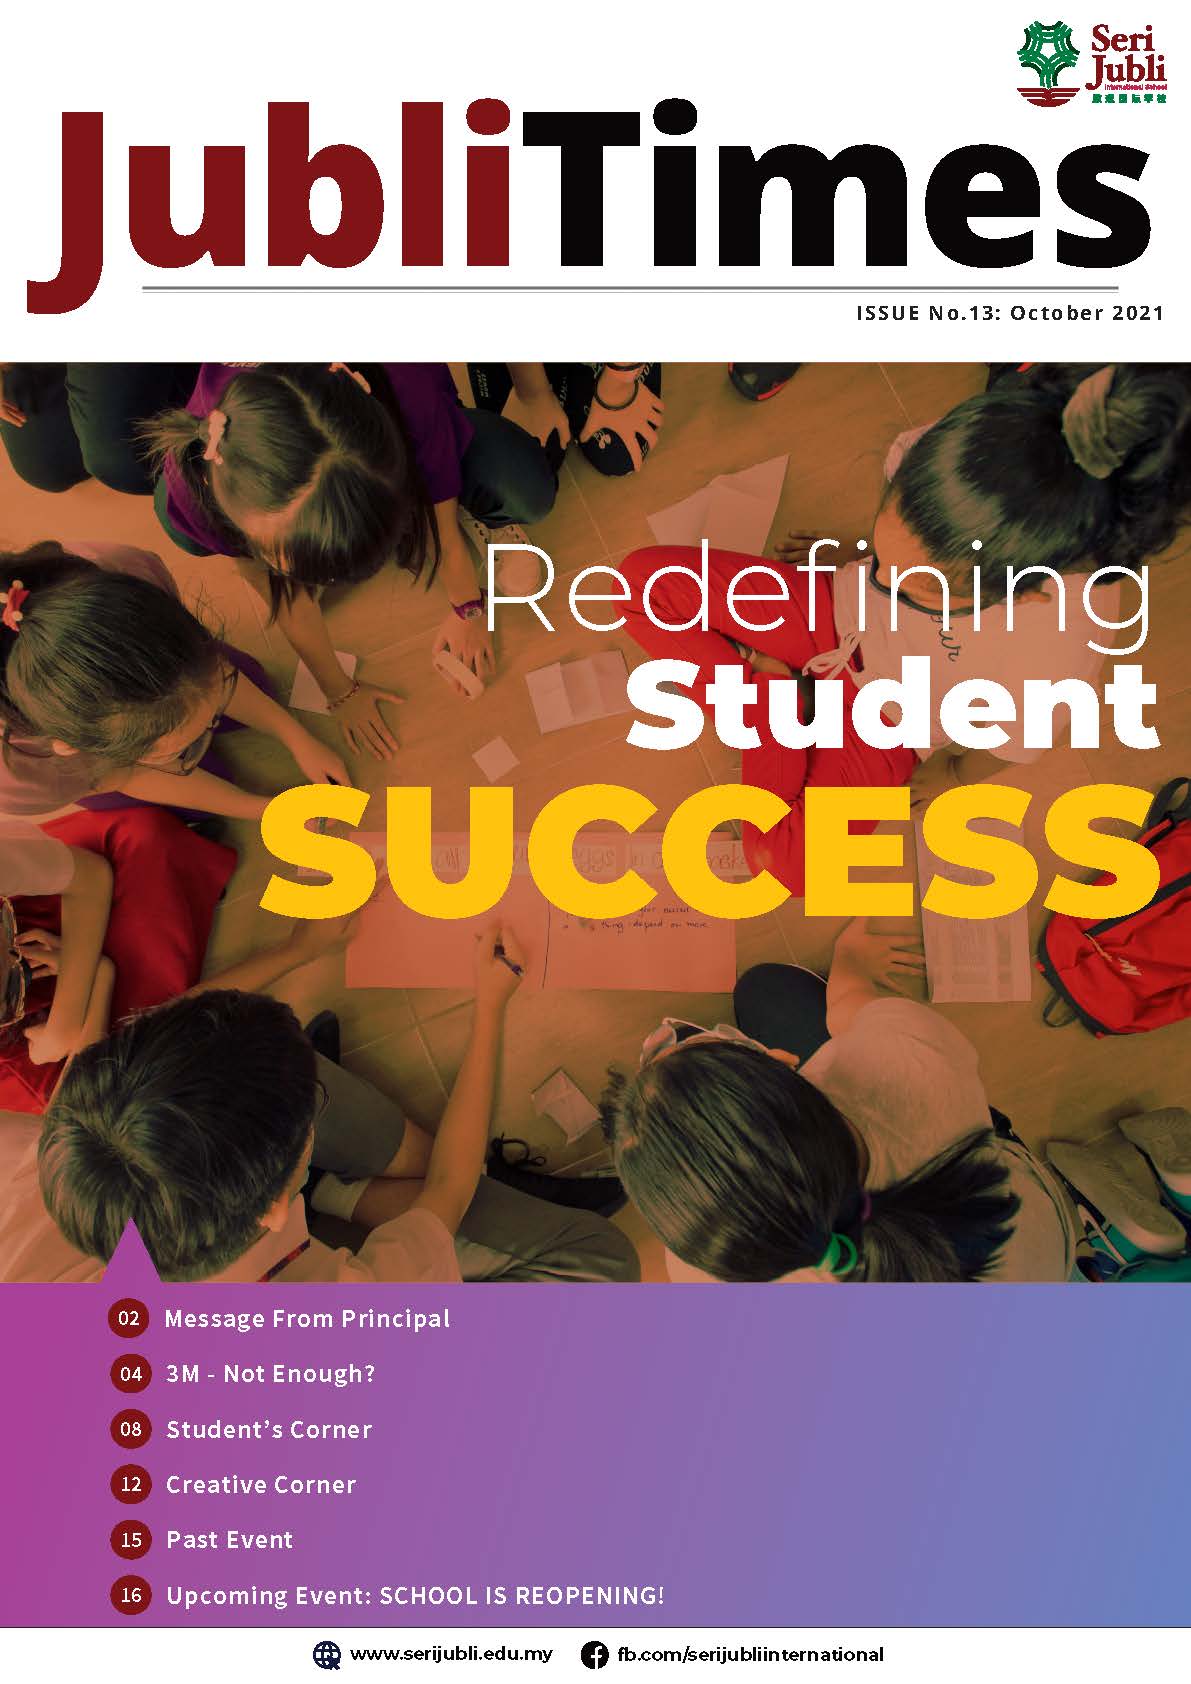 Jubli Times Issue No. 13 - October 2021